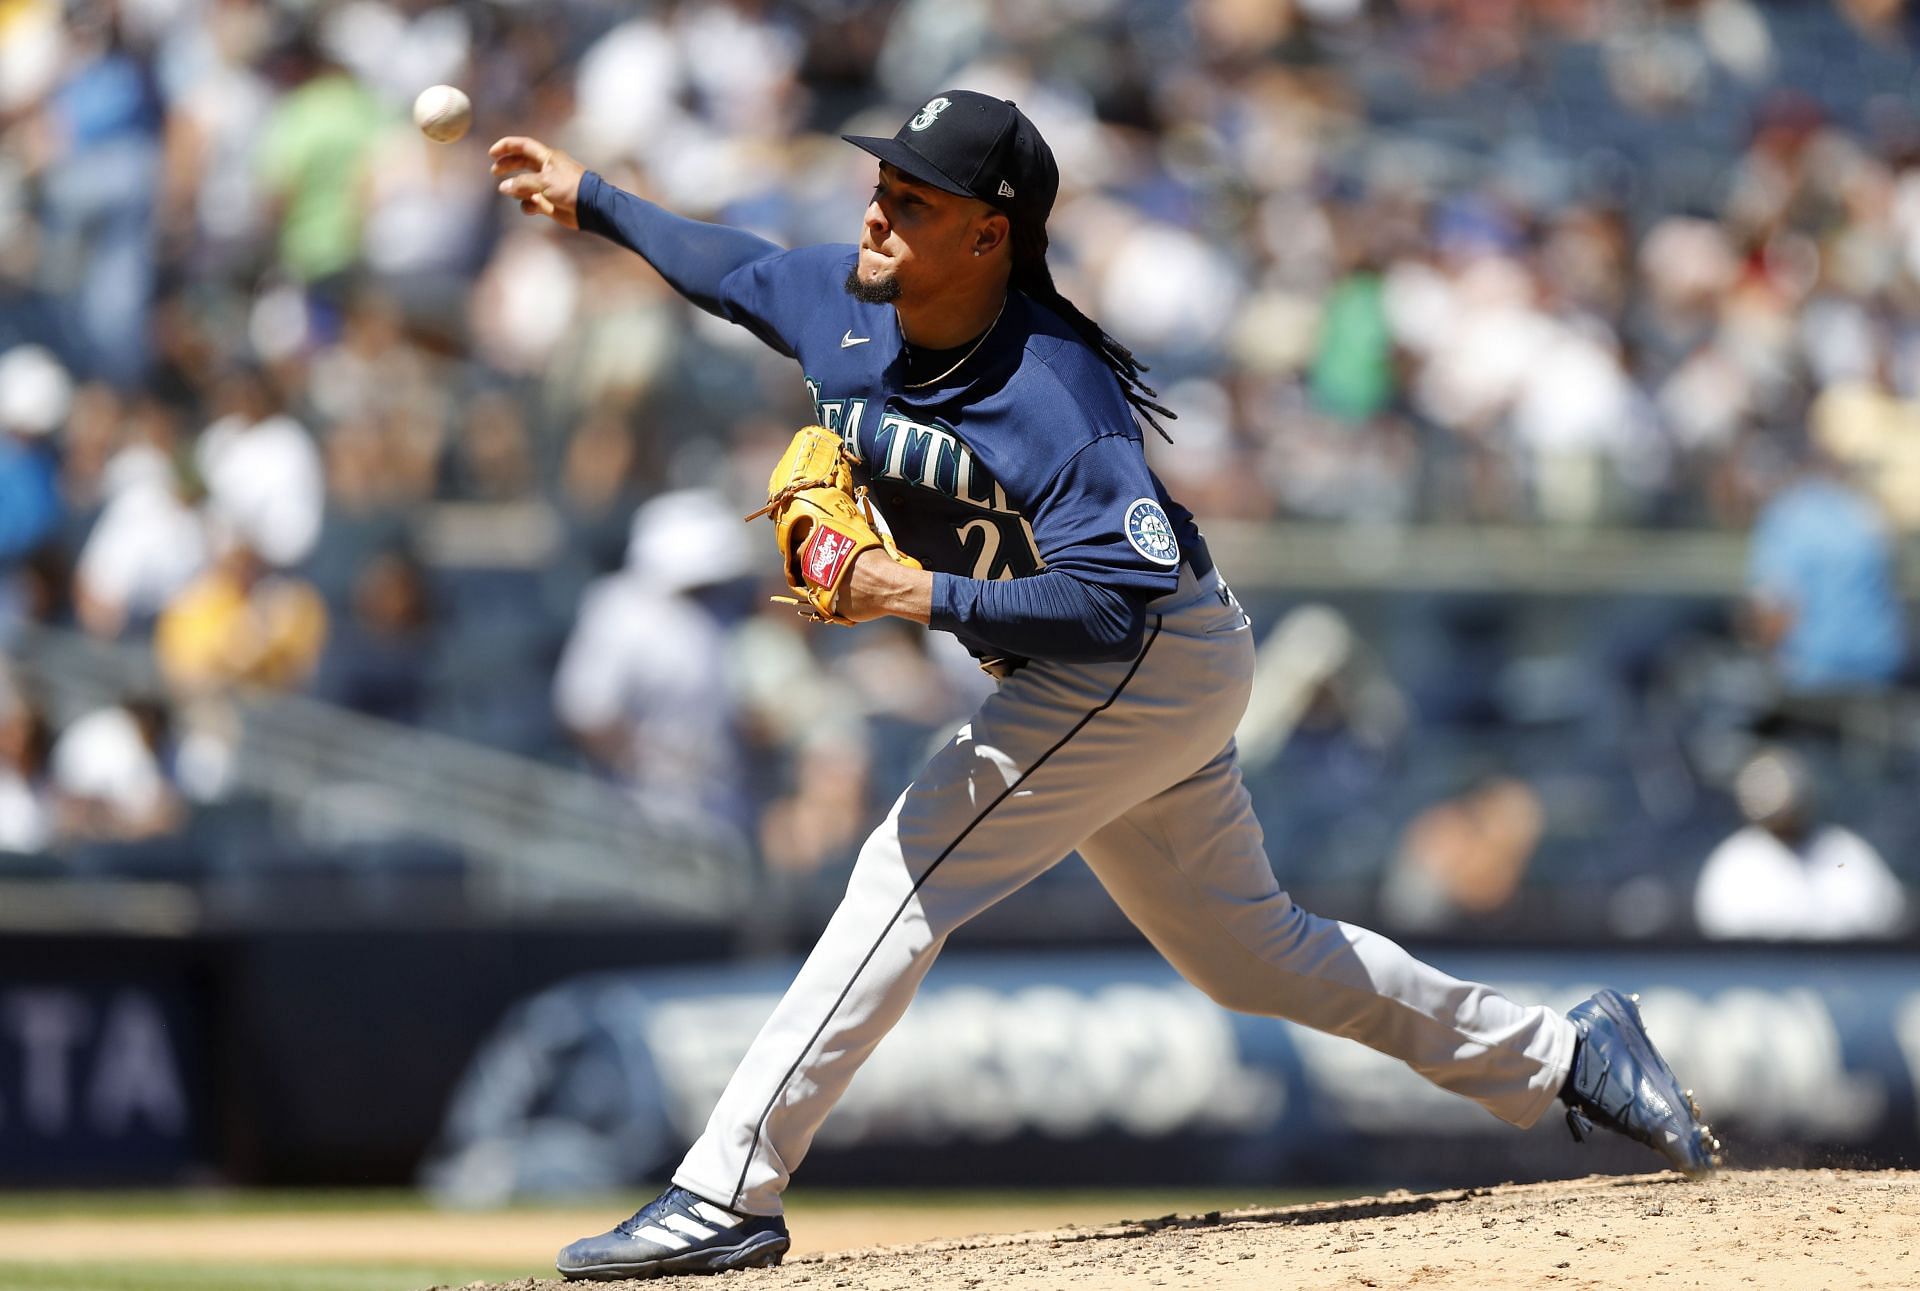 Seattle Mariners pitcher Luis Castillo made his debut with the team on Wednesday vs. the New York Yankees.